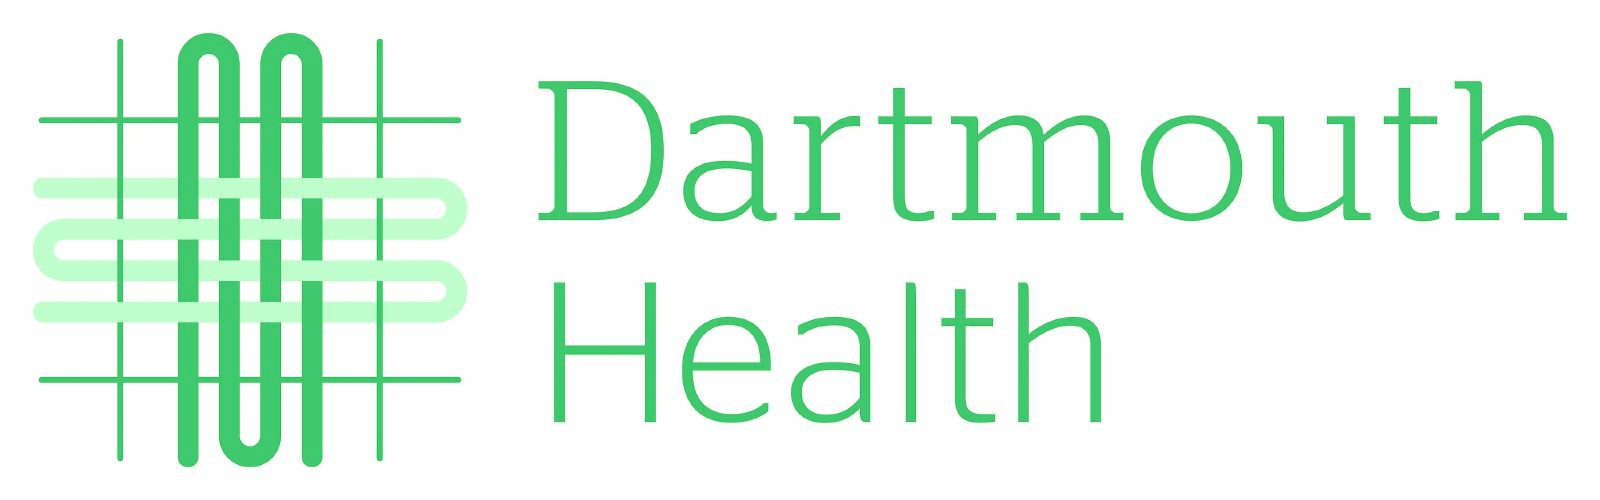  Dartmouth-Hitchcock Health officials announced on Tuesday, April 11, 2022, the organization's name is changed to Dartmouth Health and unveiled their new logo. (Courtesy Dartmouth Health)